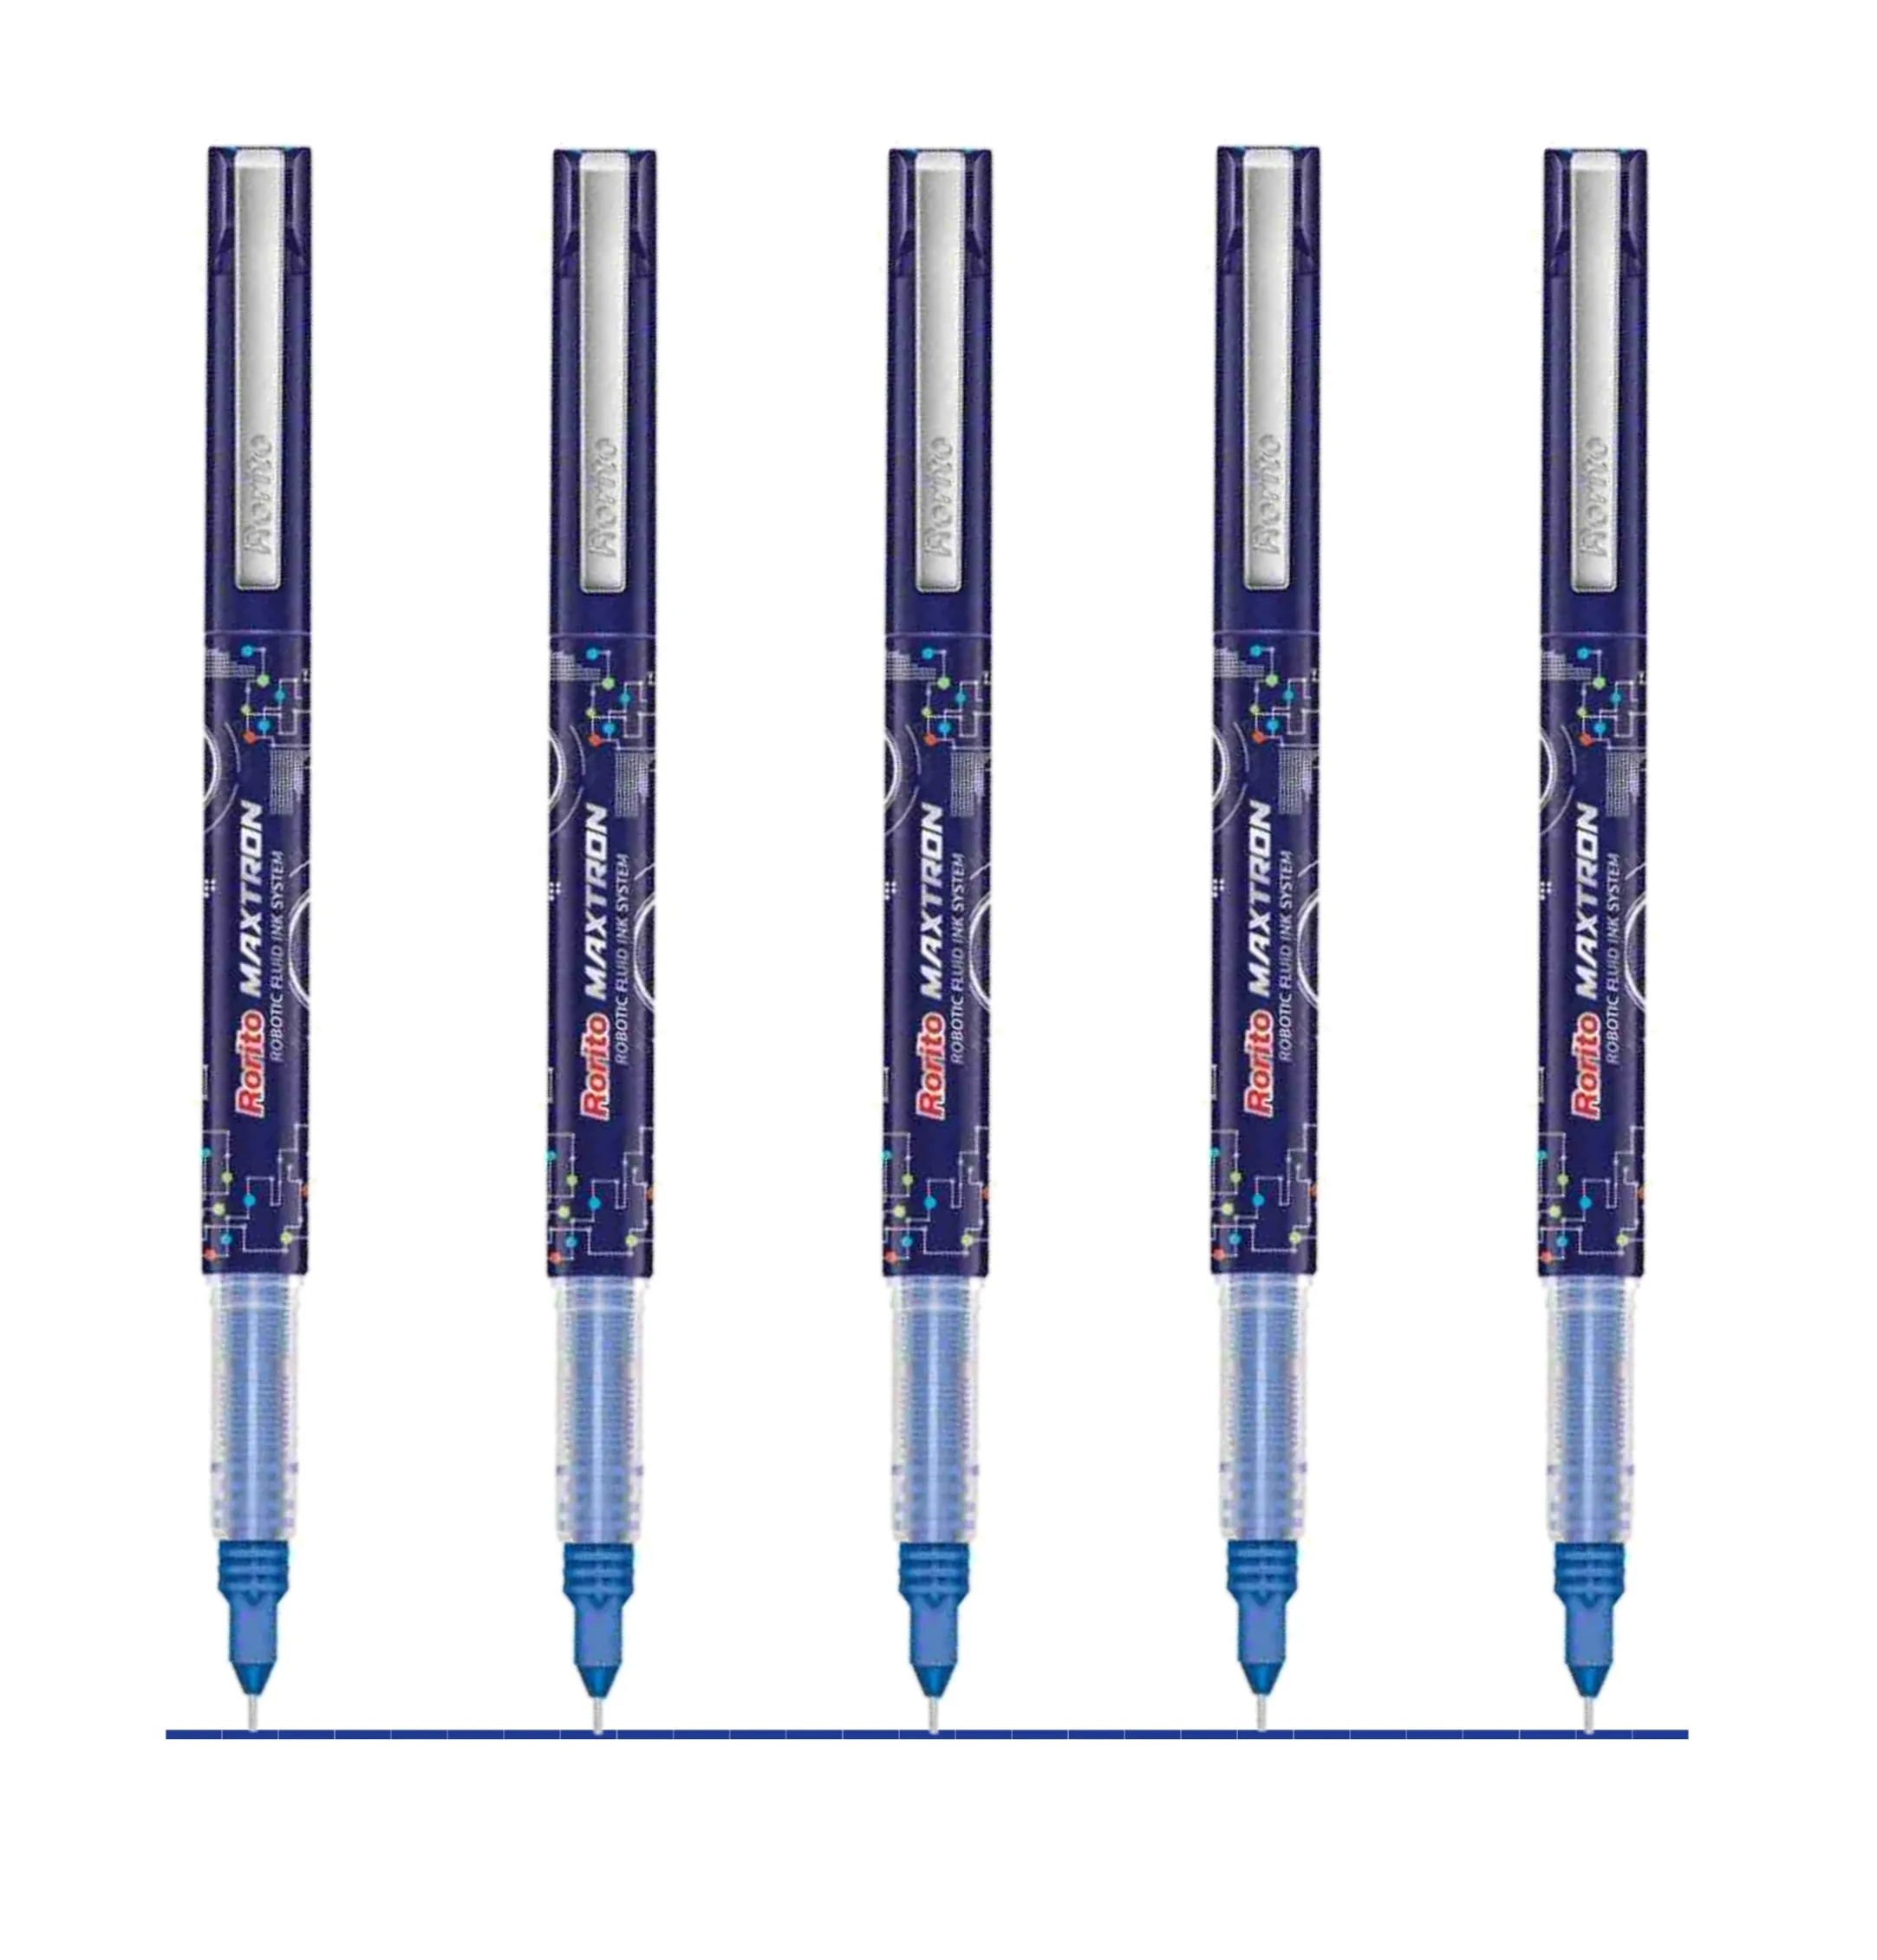 Rorito Maxtron Gel pen Blue Ink (Pack of 5)